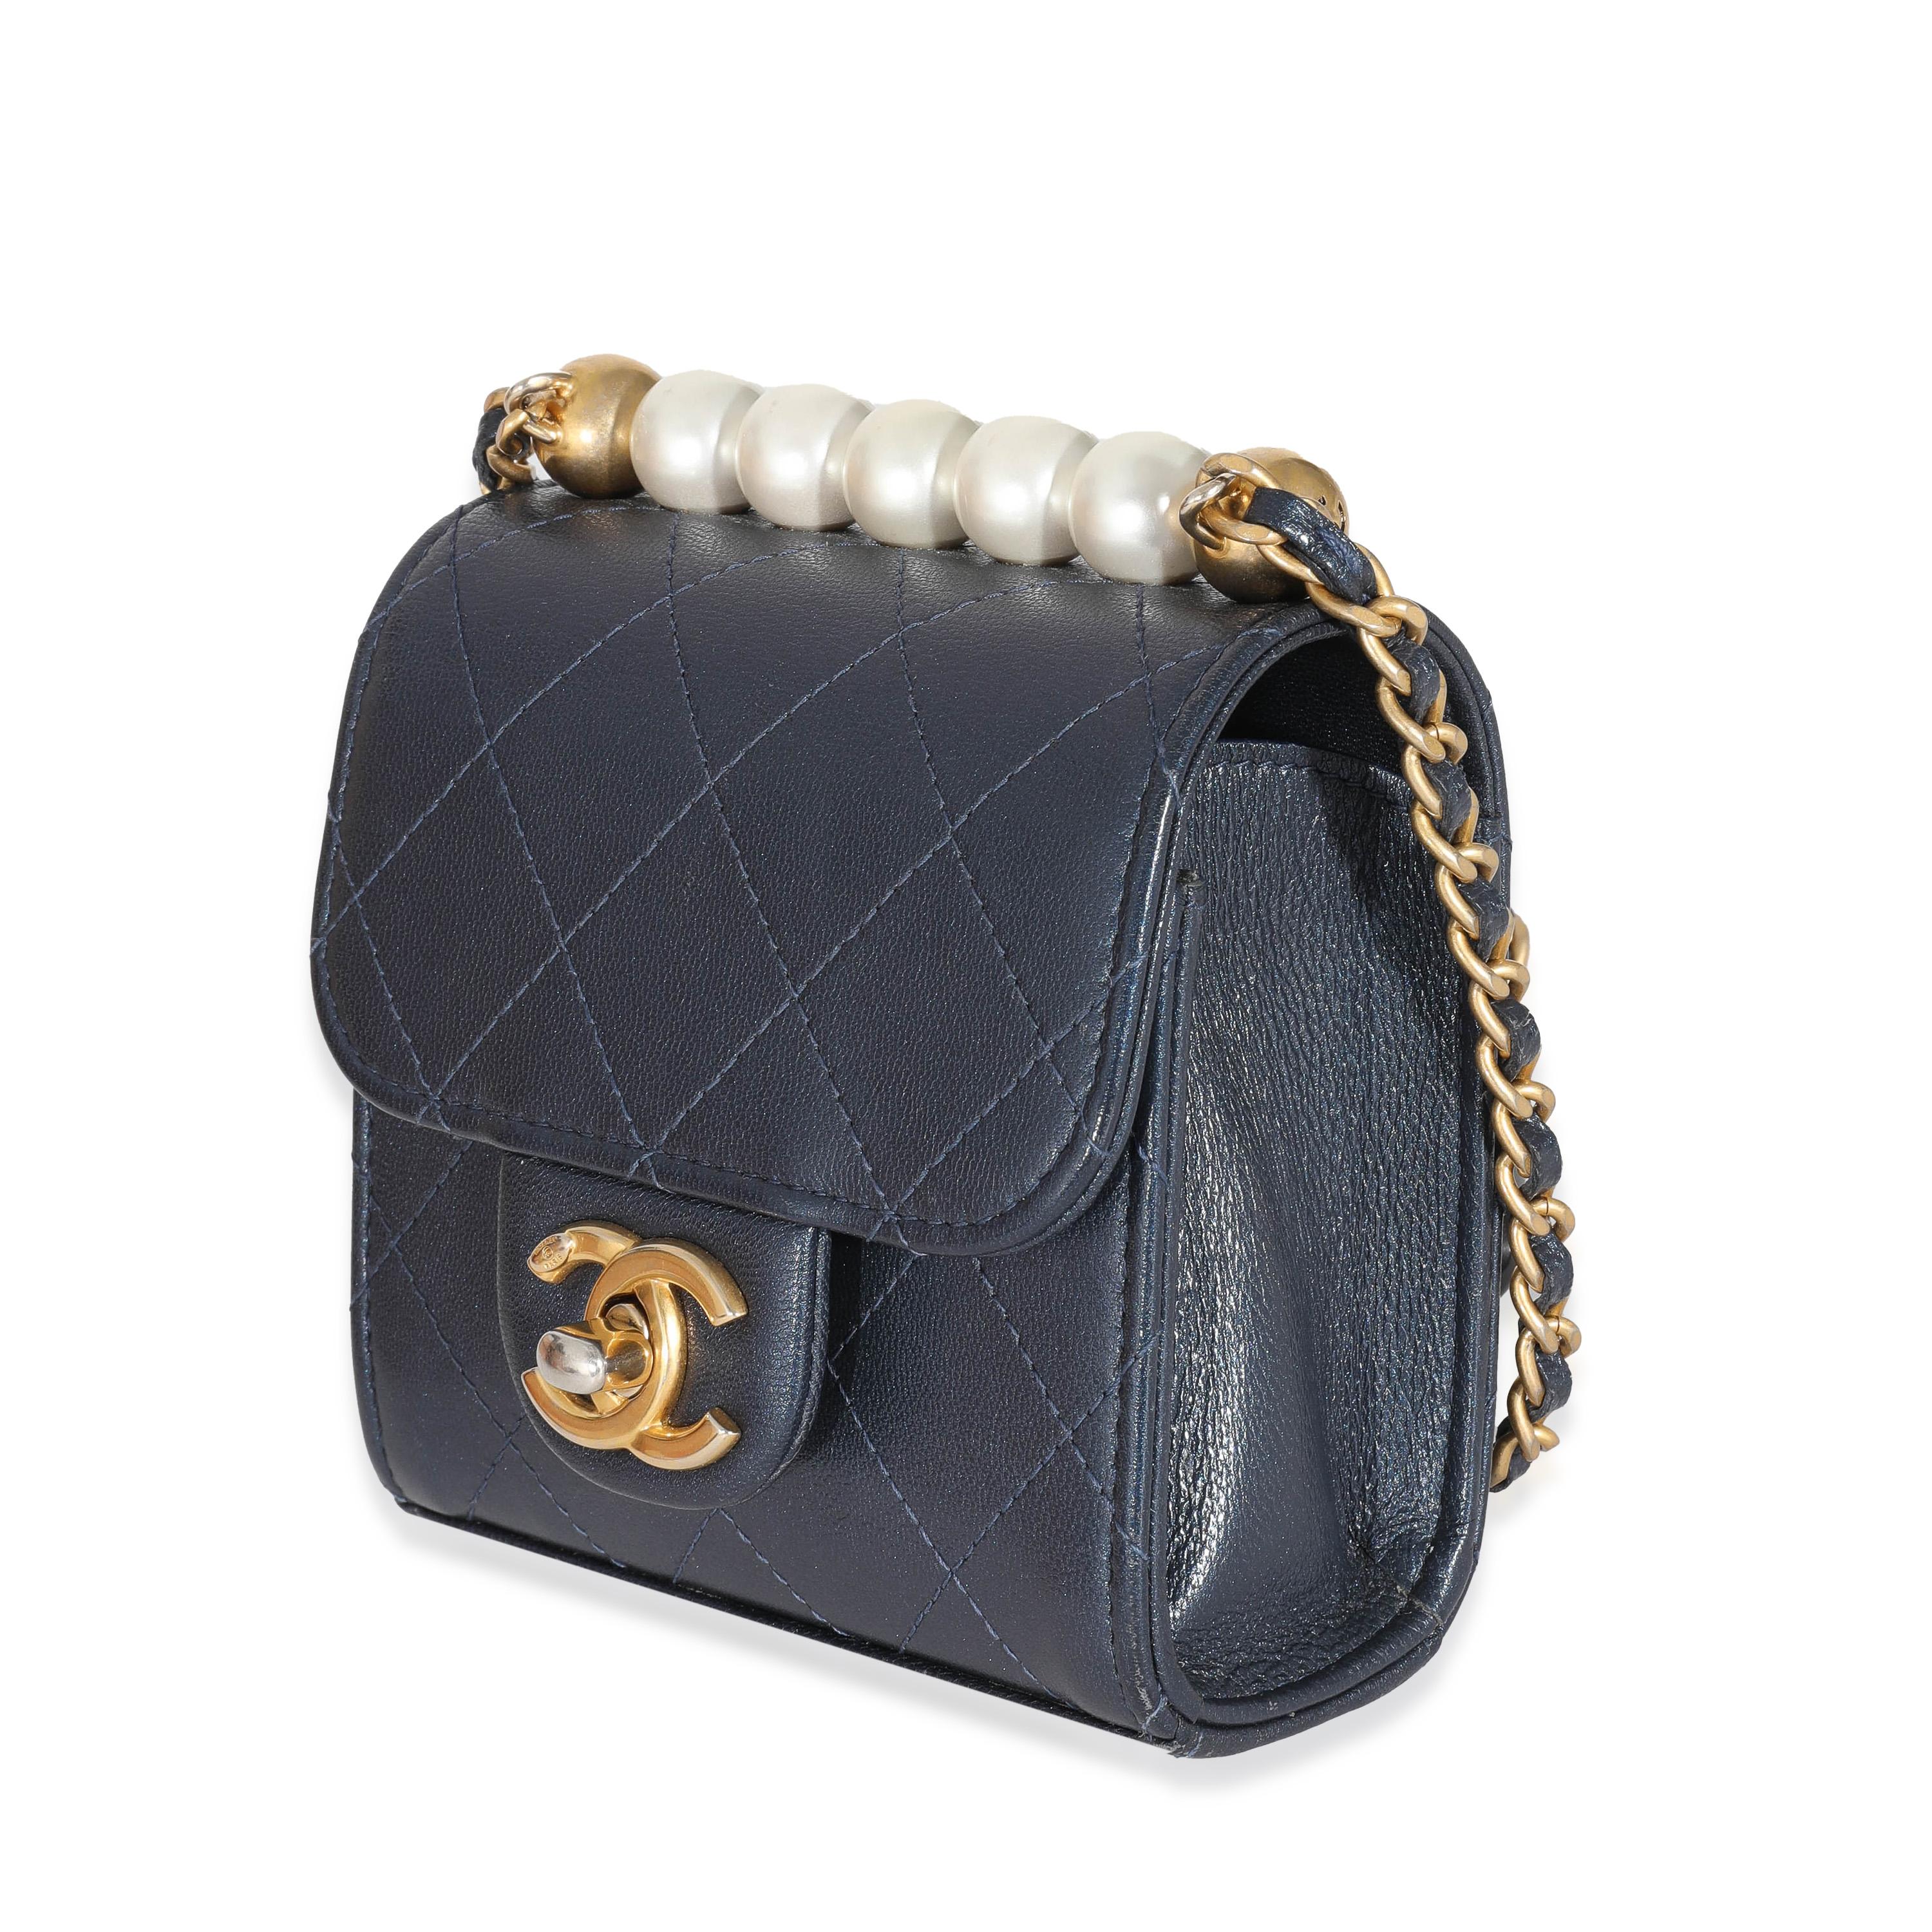 Chanel Navy Goatskin Chic Pearls Mini Flap Bag For Sale 4